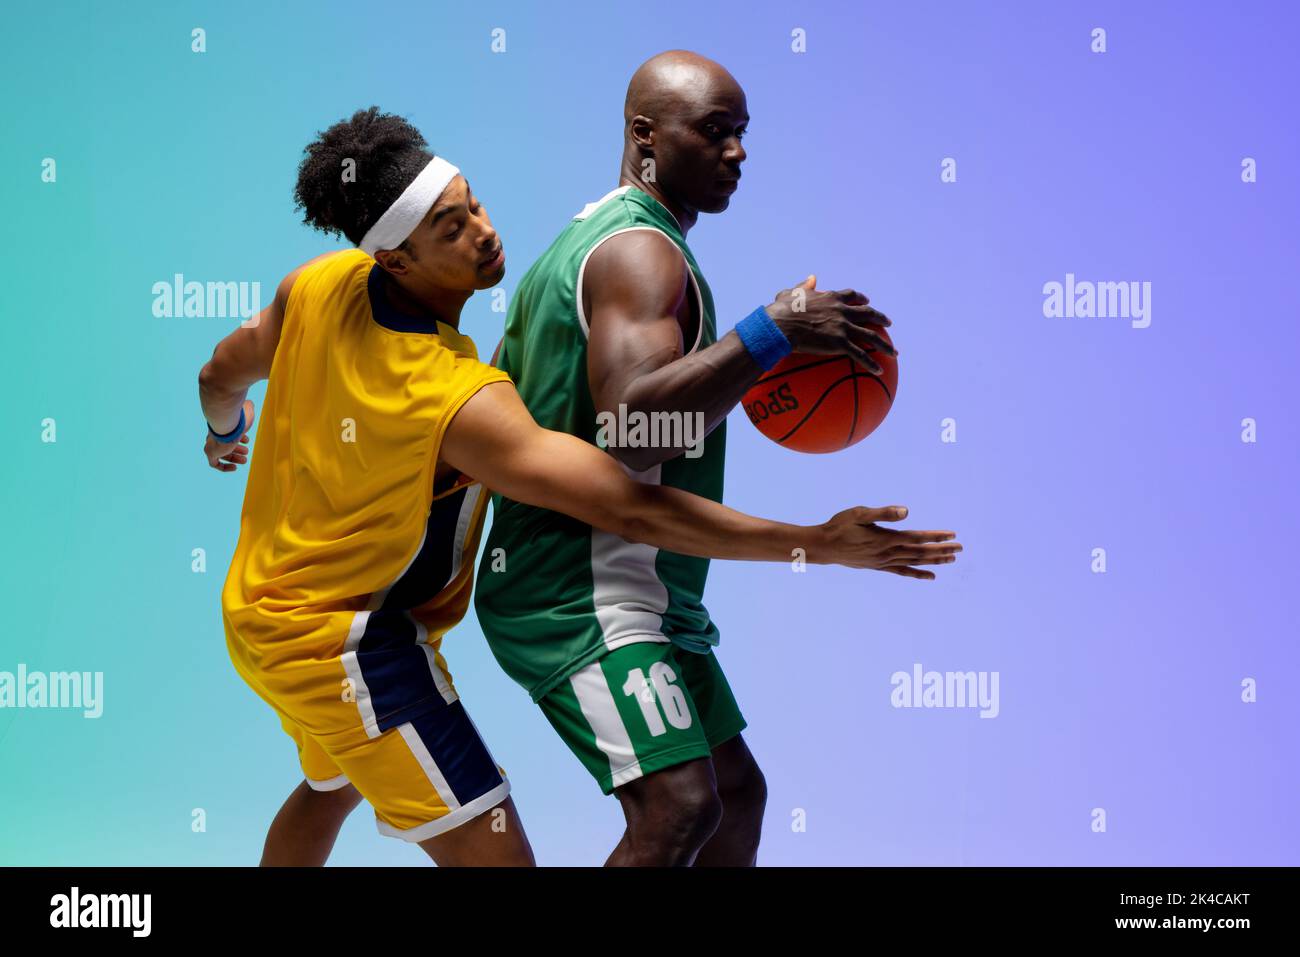 Image of two diverse basketball players with basketball playing on purple to green background. Sports and competition concept. Stock Photo